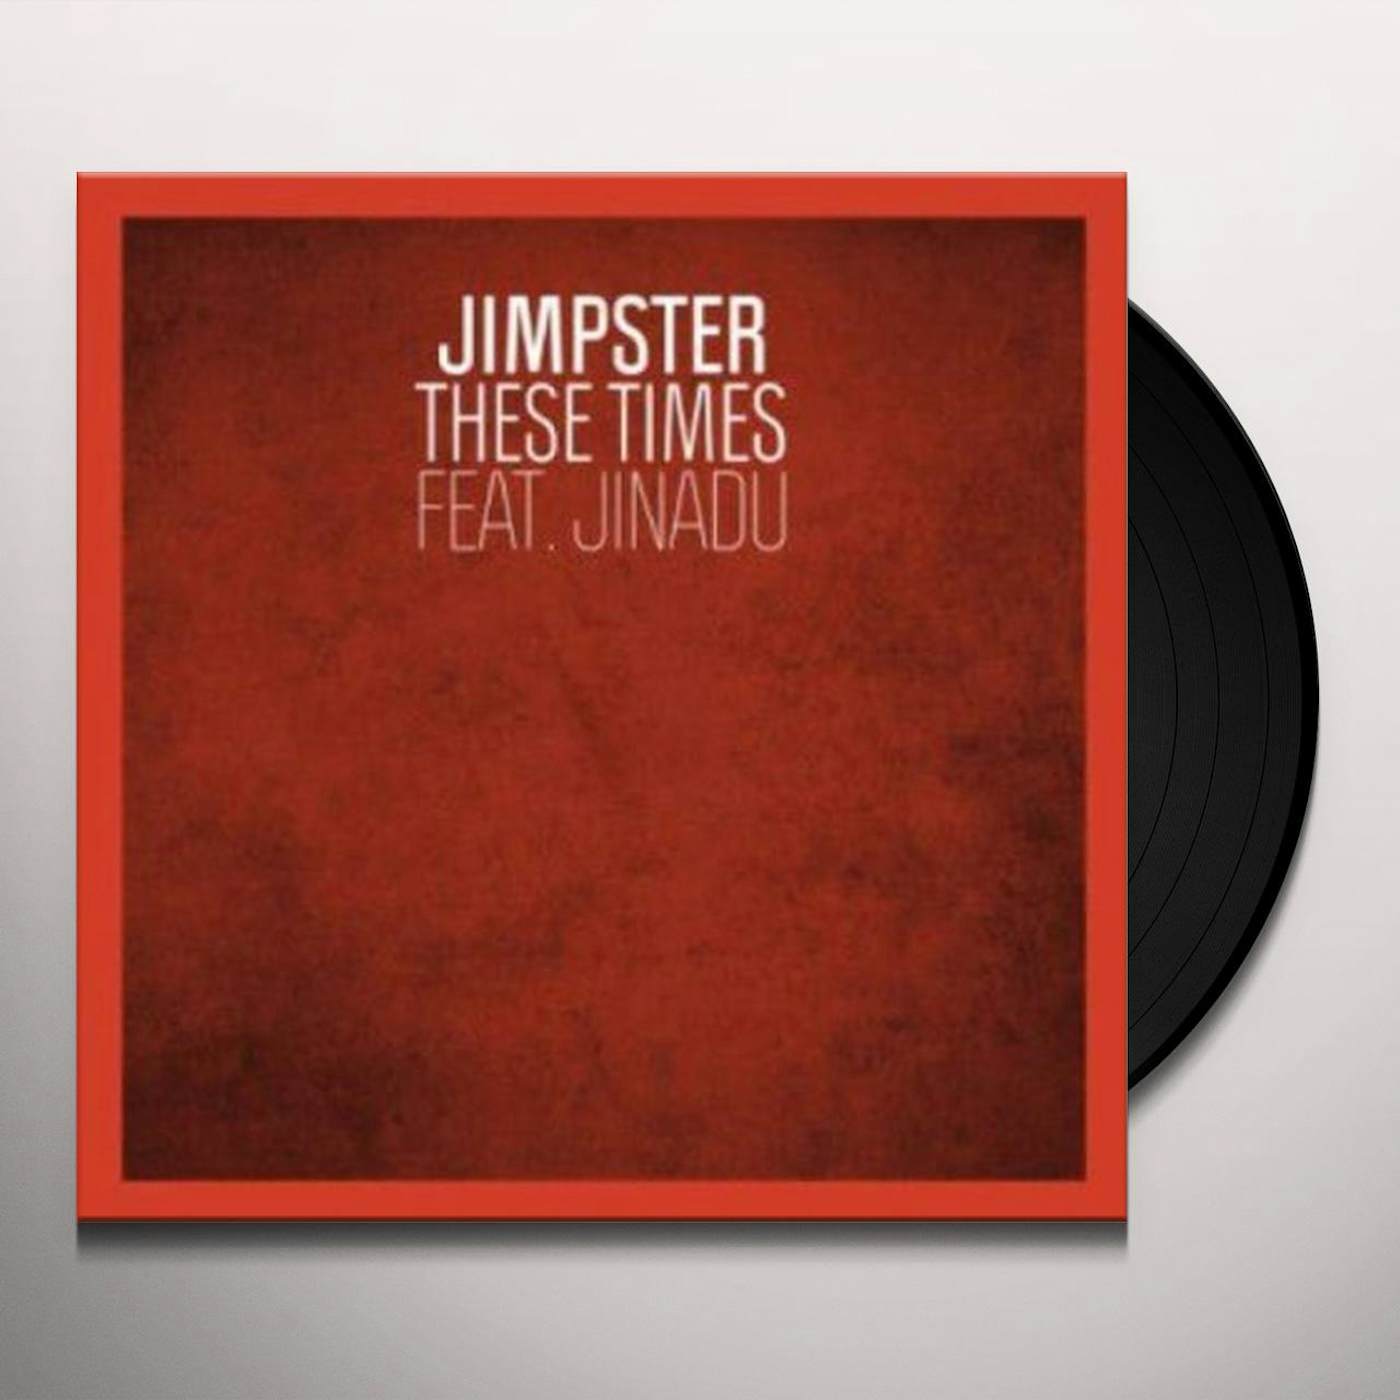 Jimpster These Times Vinyl Record